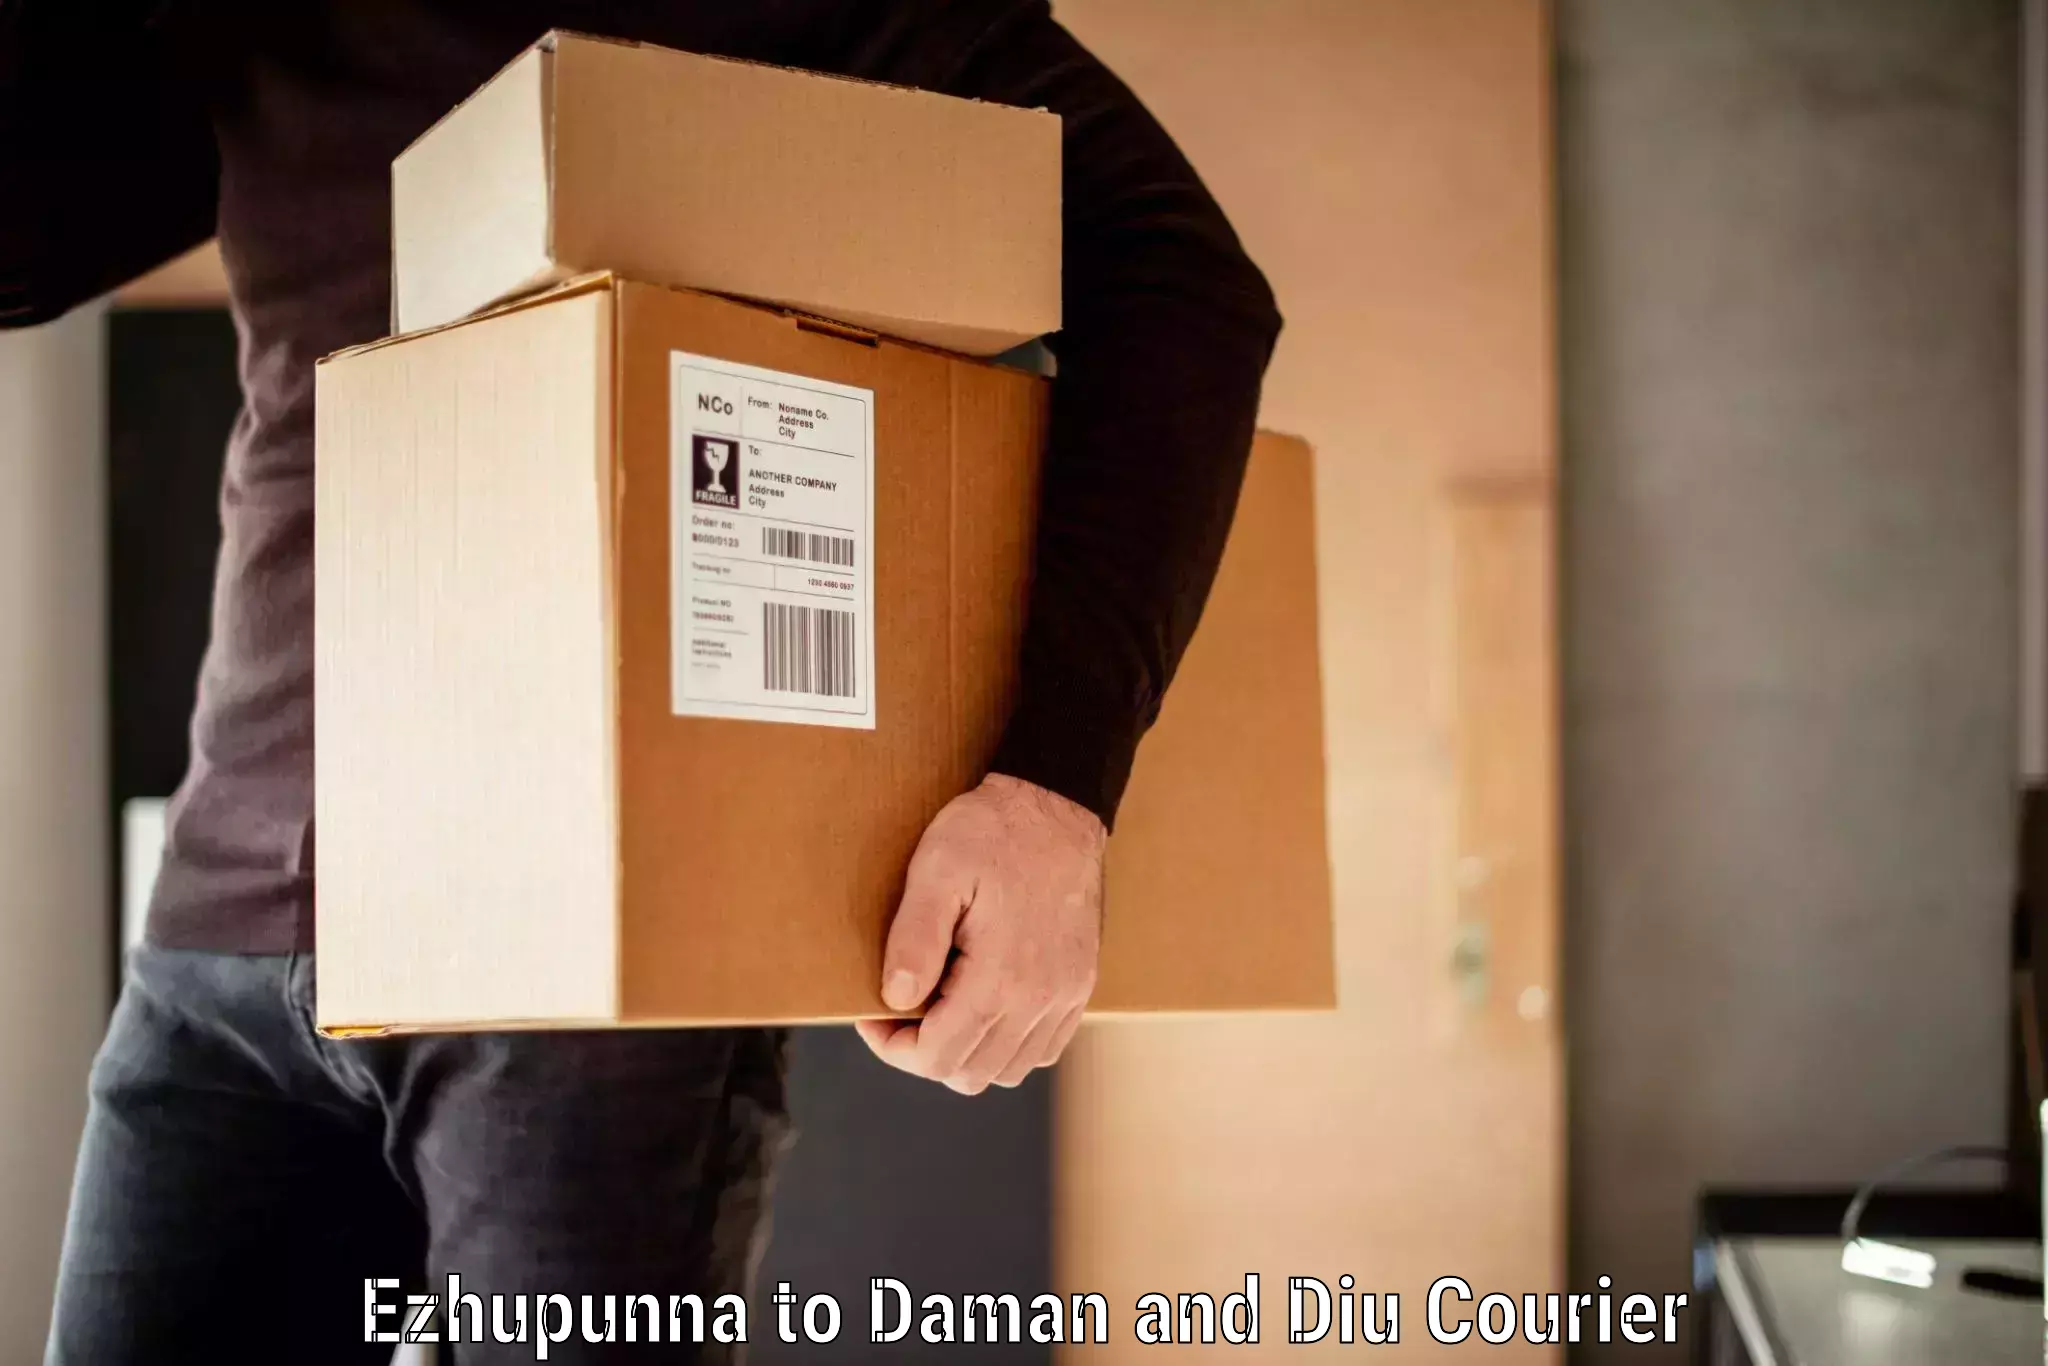 Luggage shipment specialists Ezhupunna to Daman and Diu